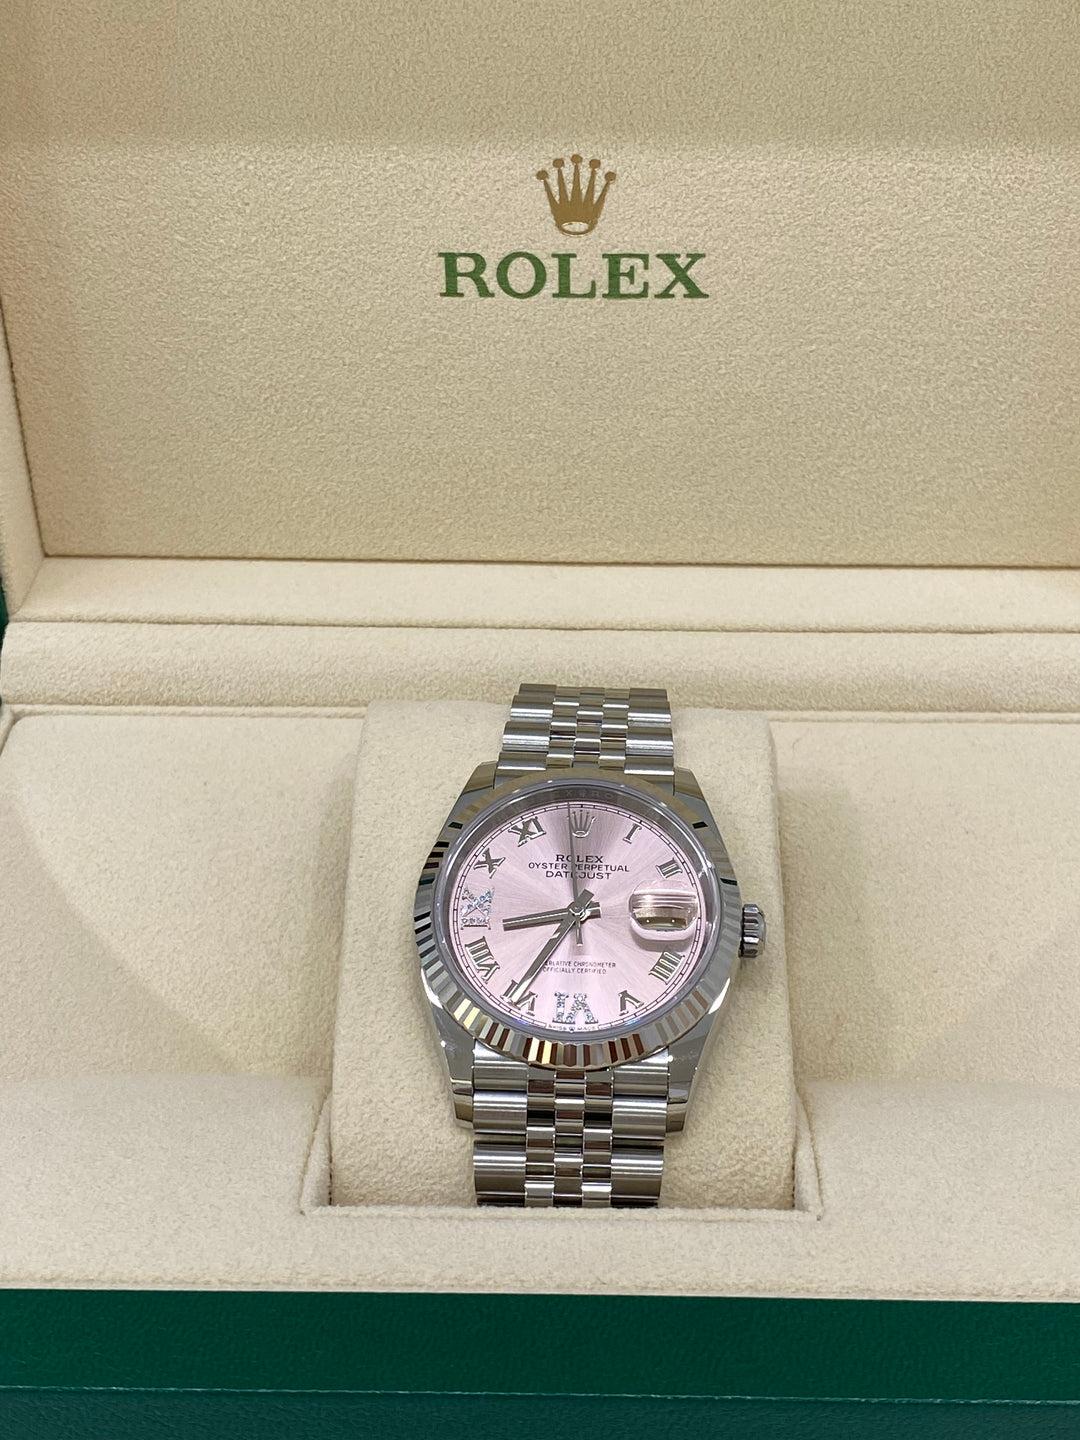 Rolex Oyster Perpetual 36mm Silver Pink Face

Condition: Brand new

Material: Stainless steel

Year: 2023

Size: 36mm

Inclusion: Full set